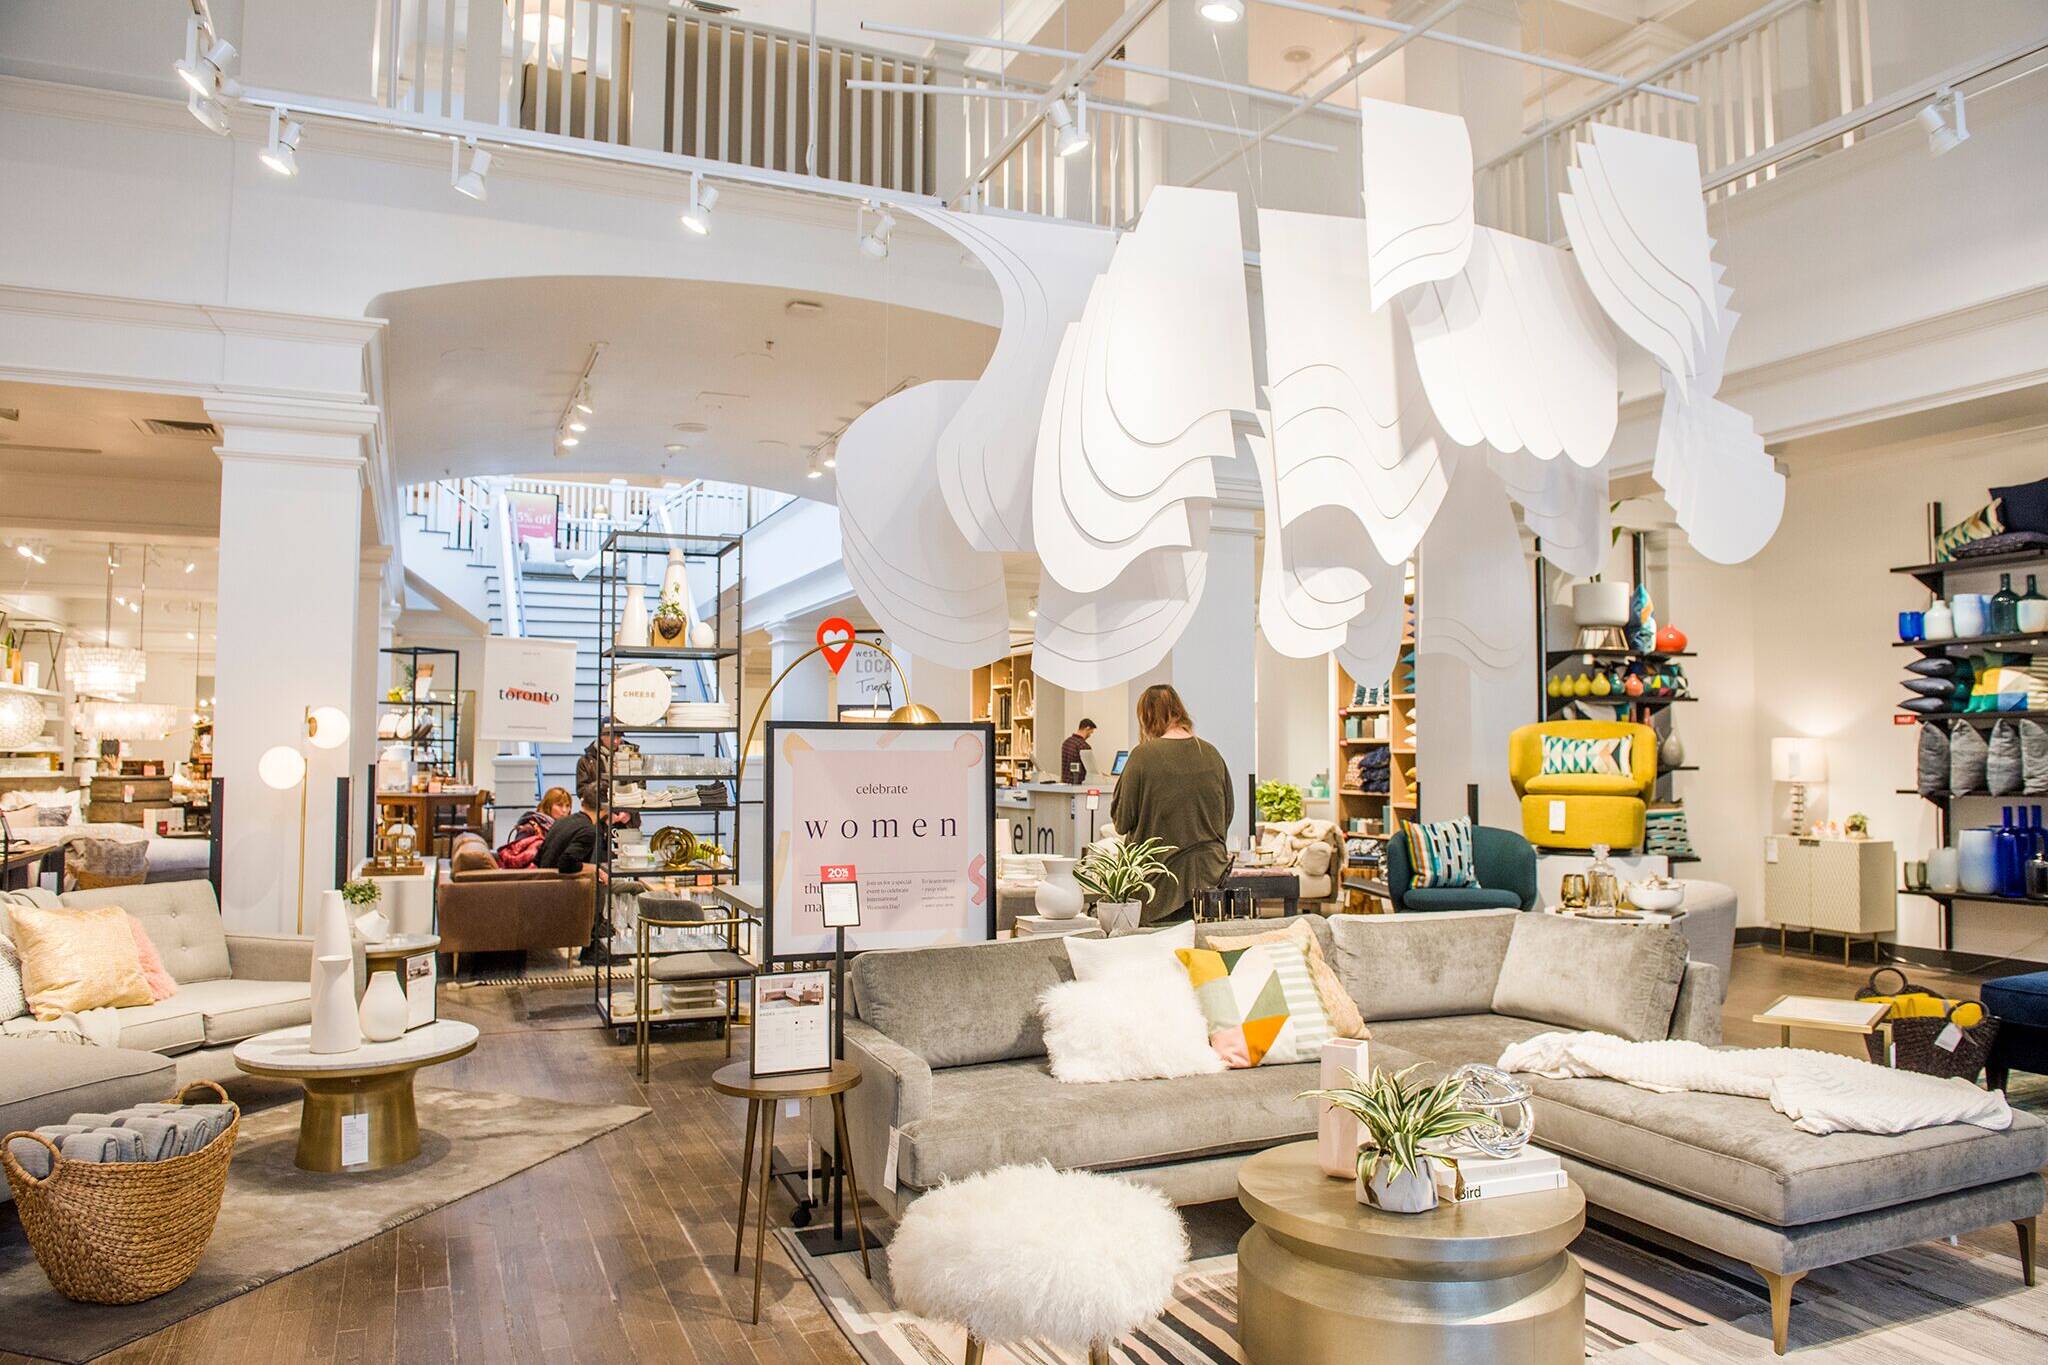 West Elm is opening a new Toronto location